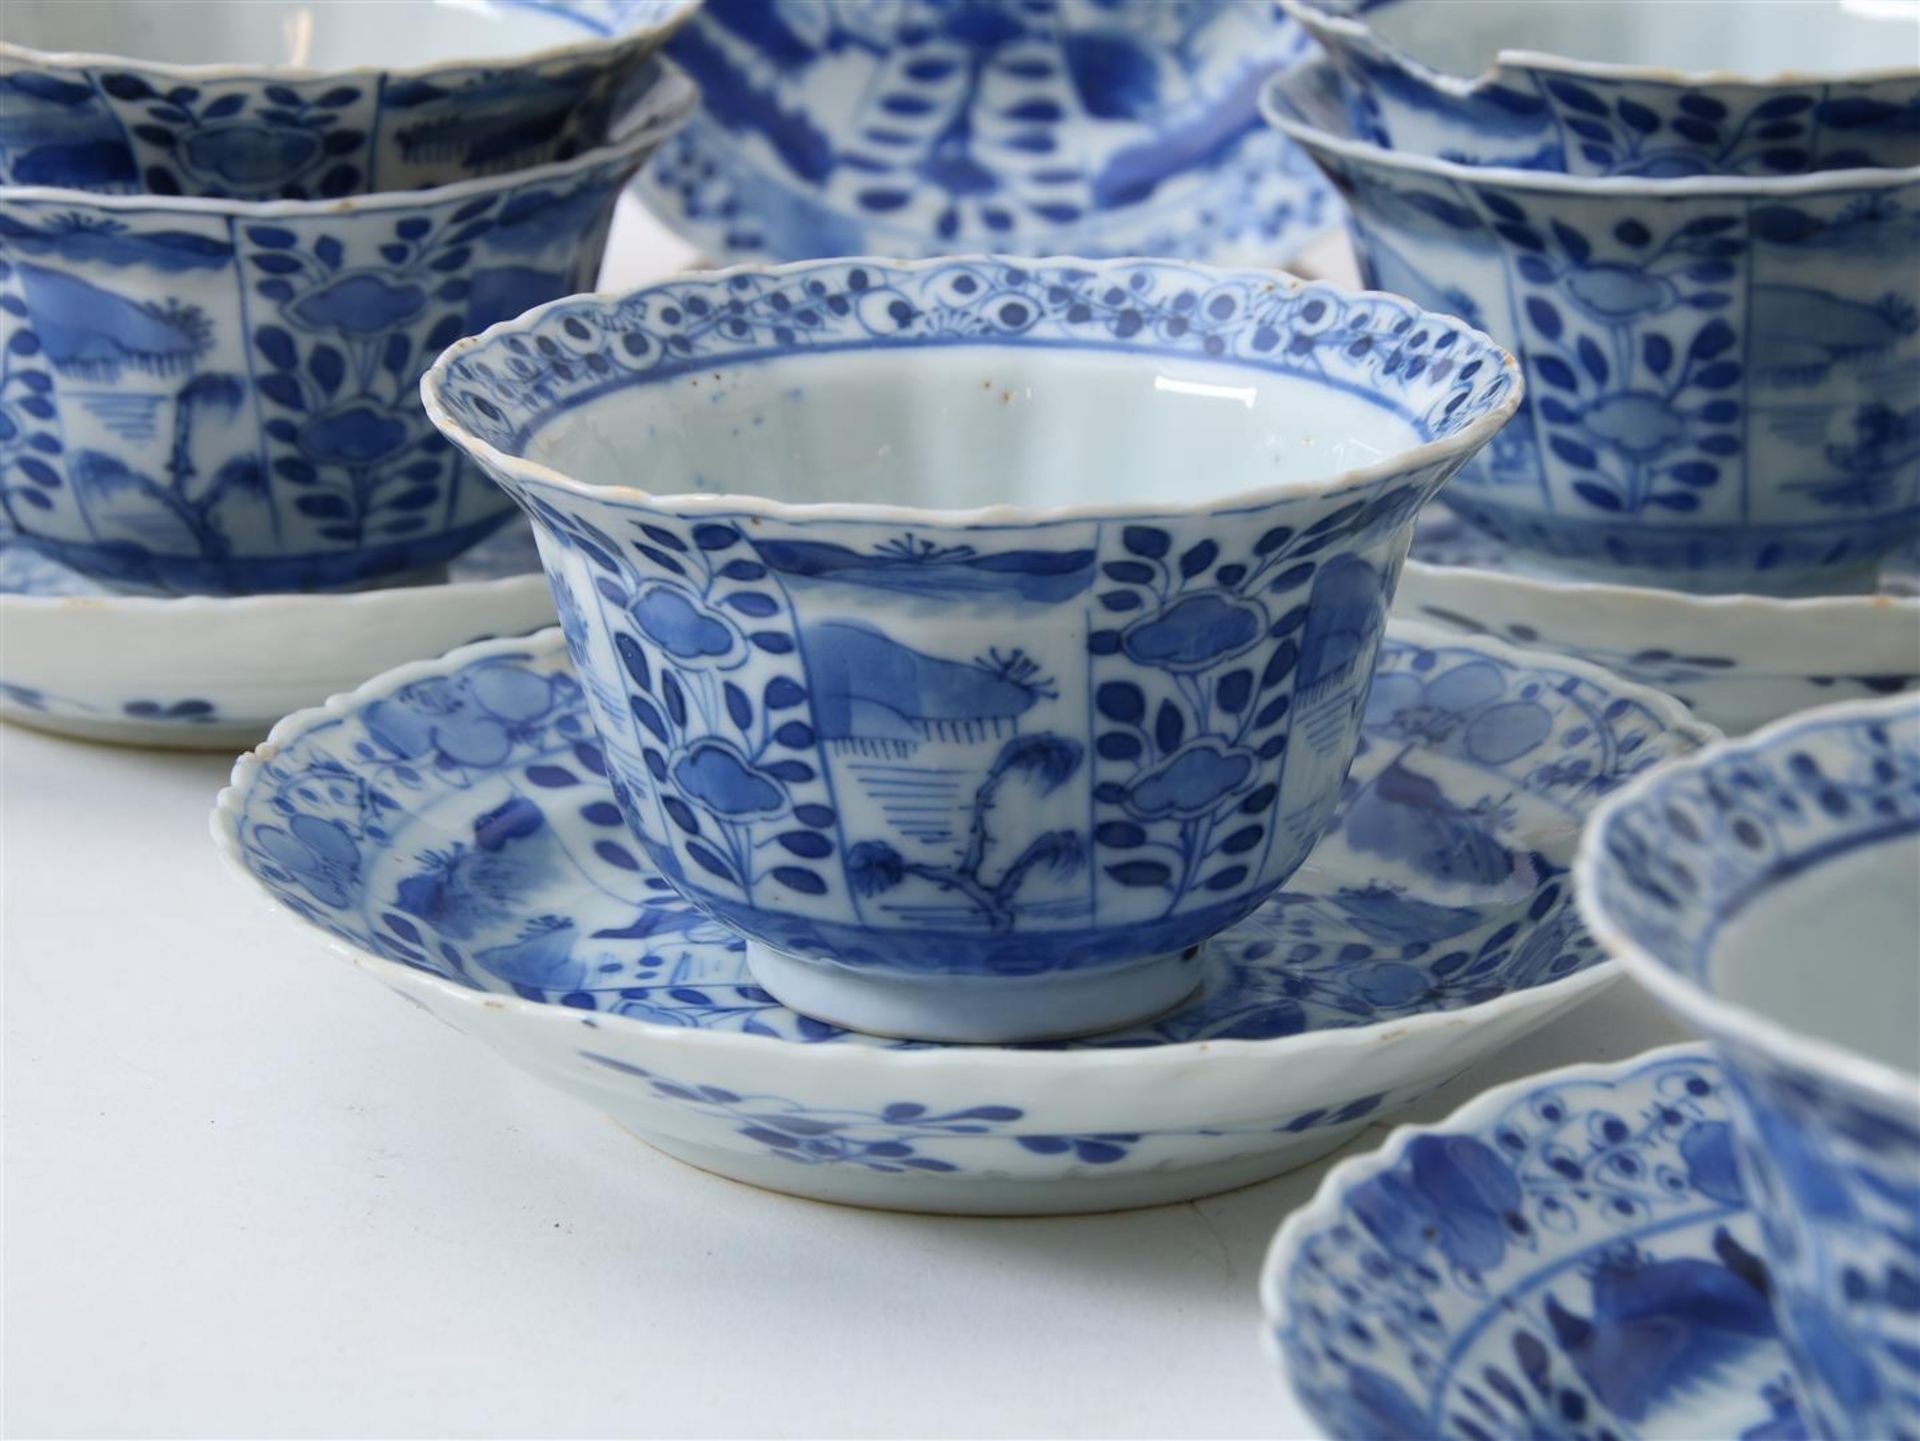 Lot of 13 porcelain cups and 10 saucers decorated with landscapes and parsley decor, Kangxi mark, - Image 3 of 8